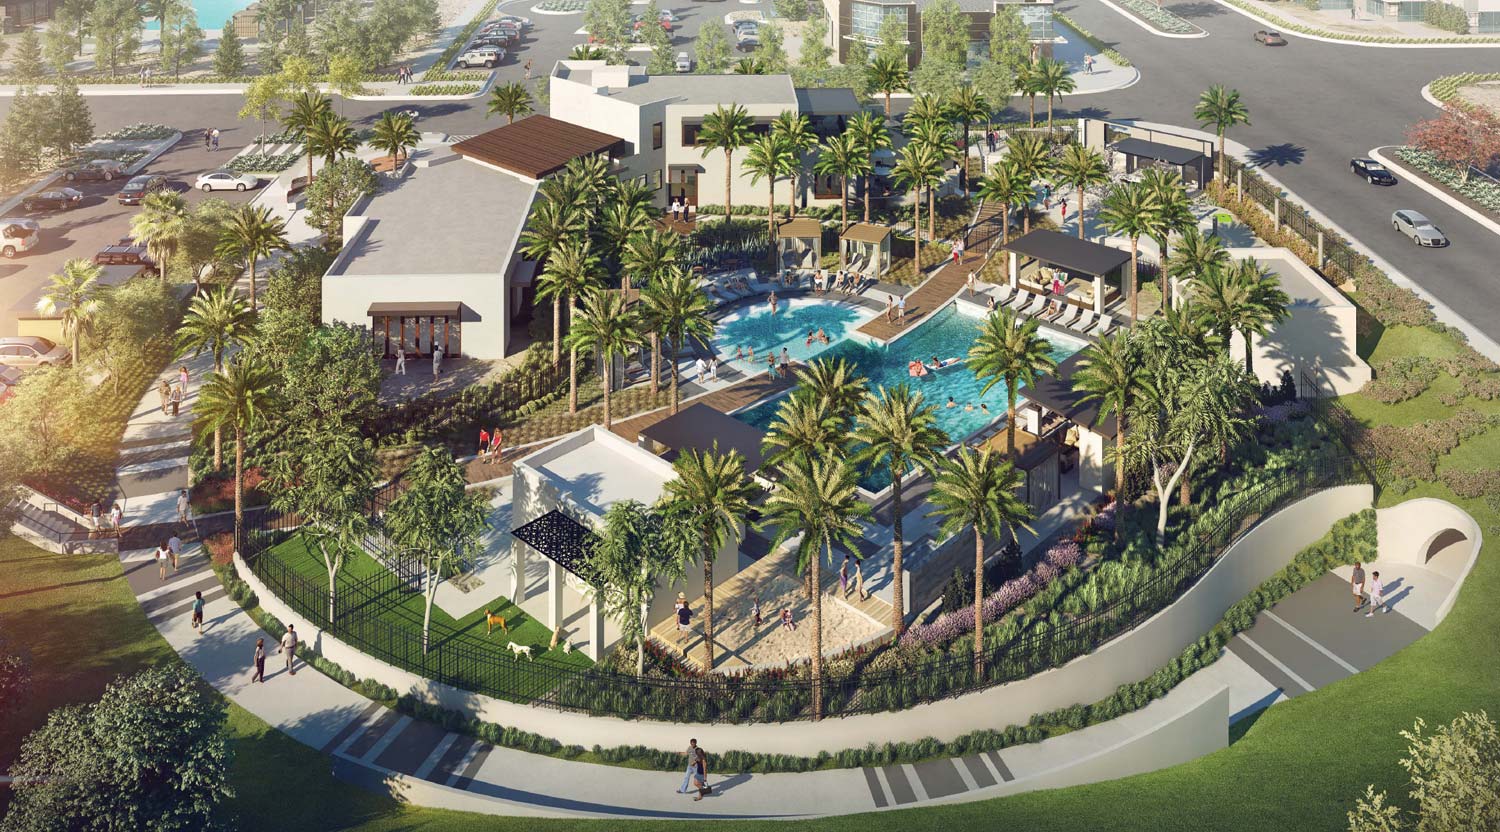 grand-opening-event-at-the-resort-in-rancho-cucamonga-on-saturday